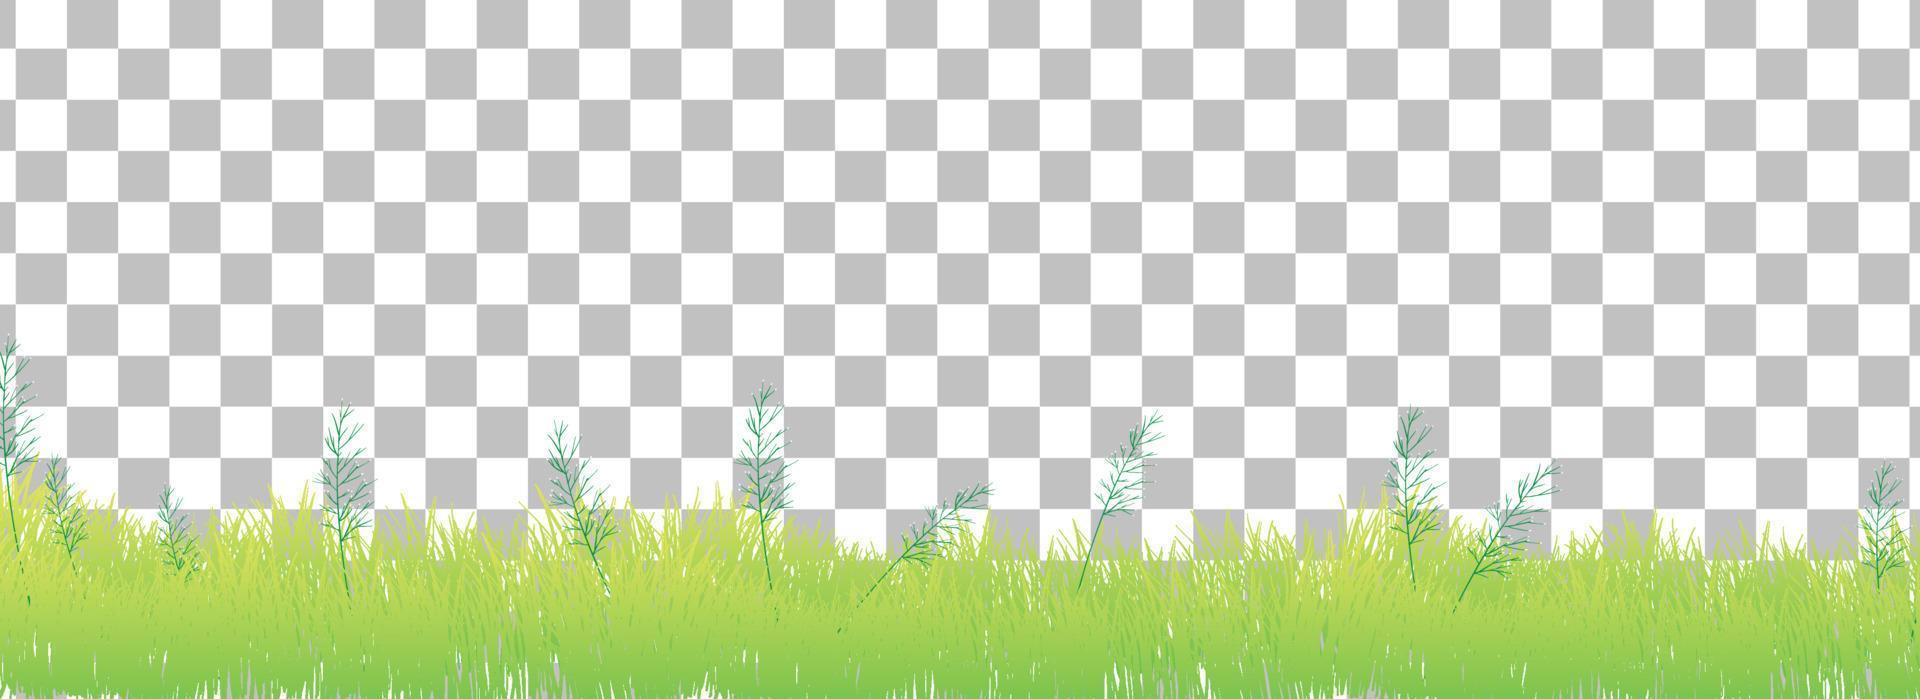 Green grass on grid background vector